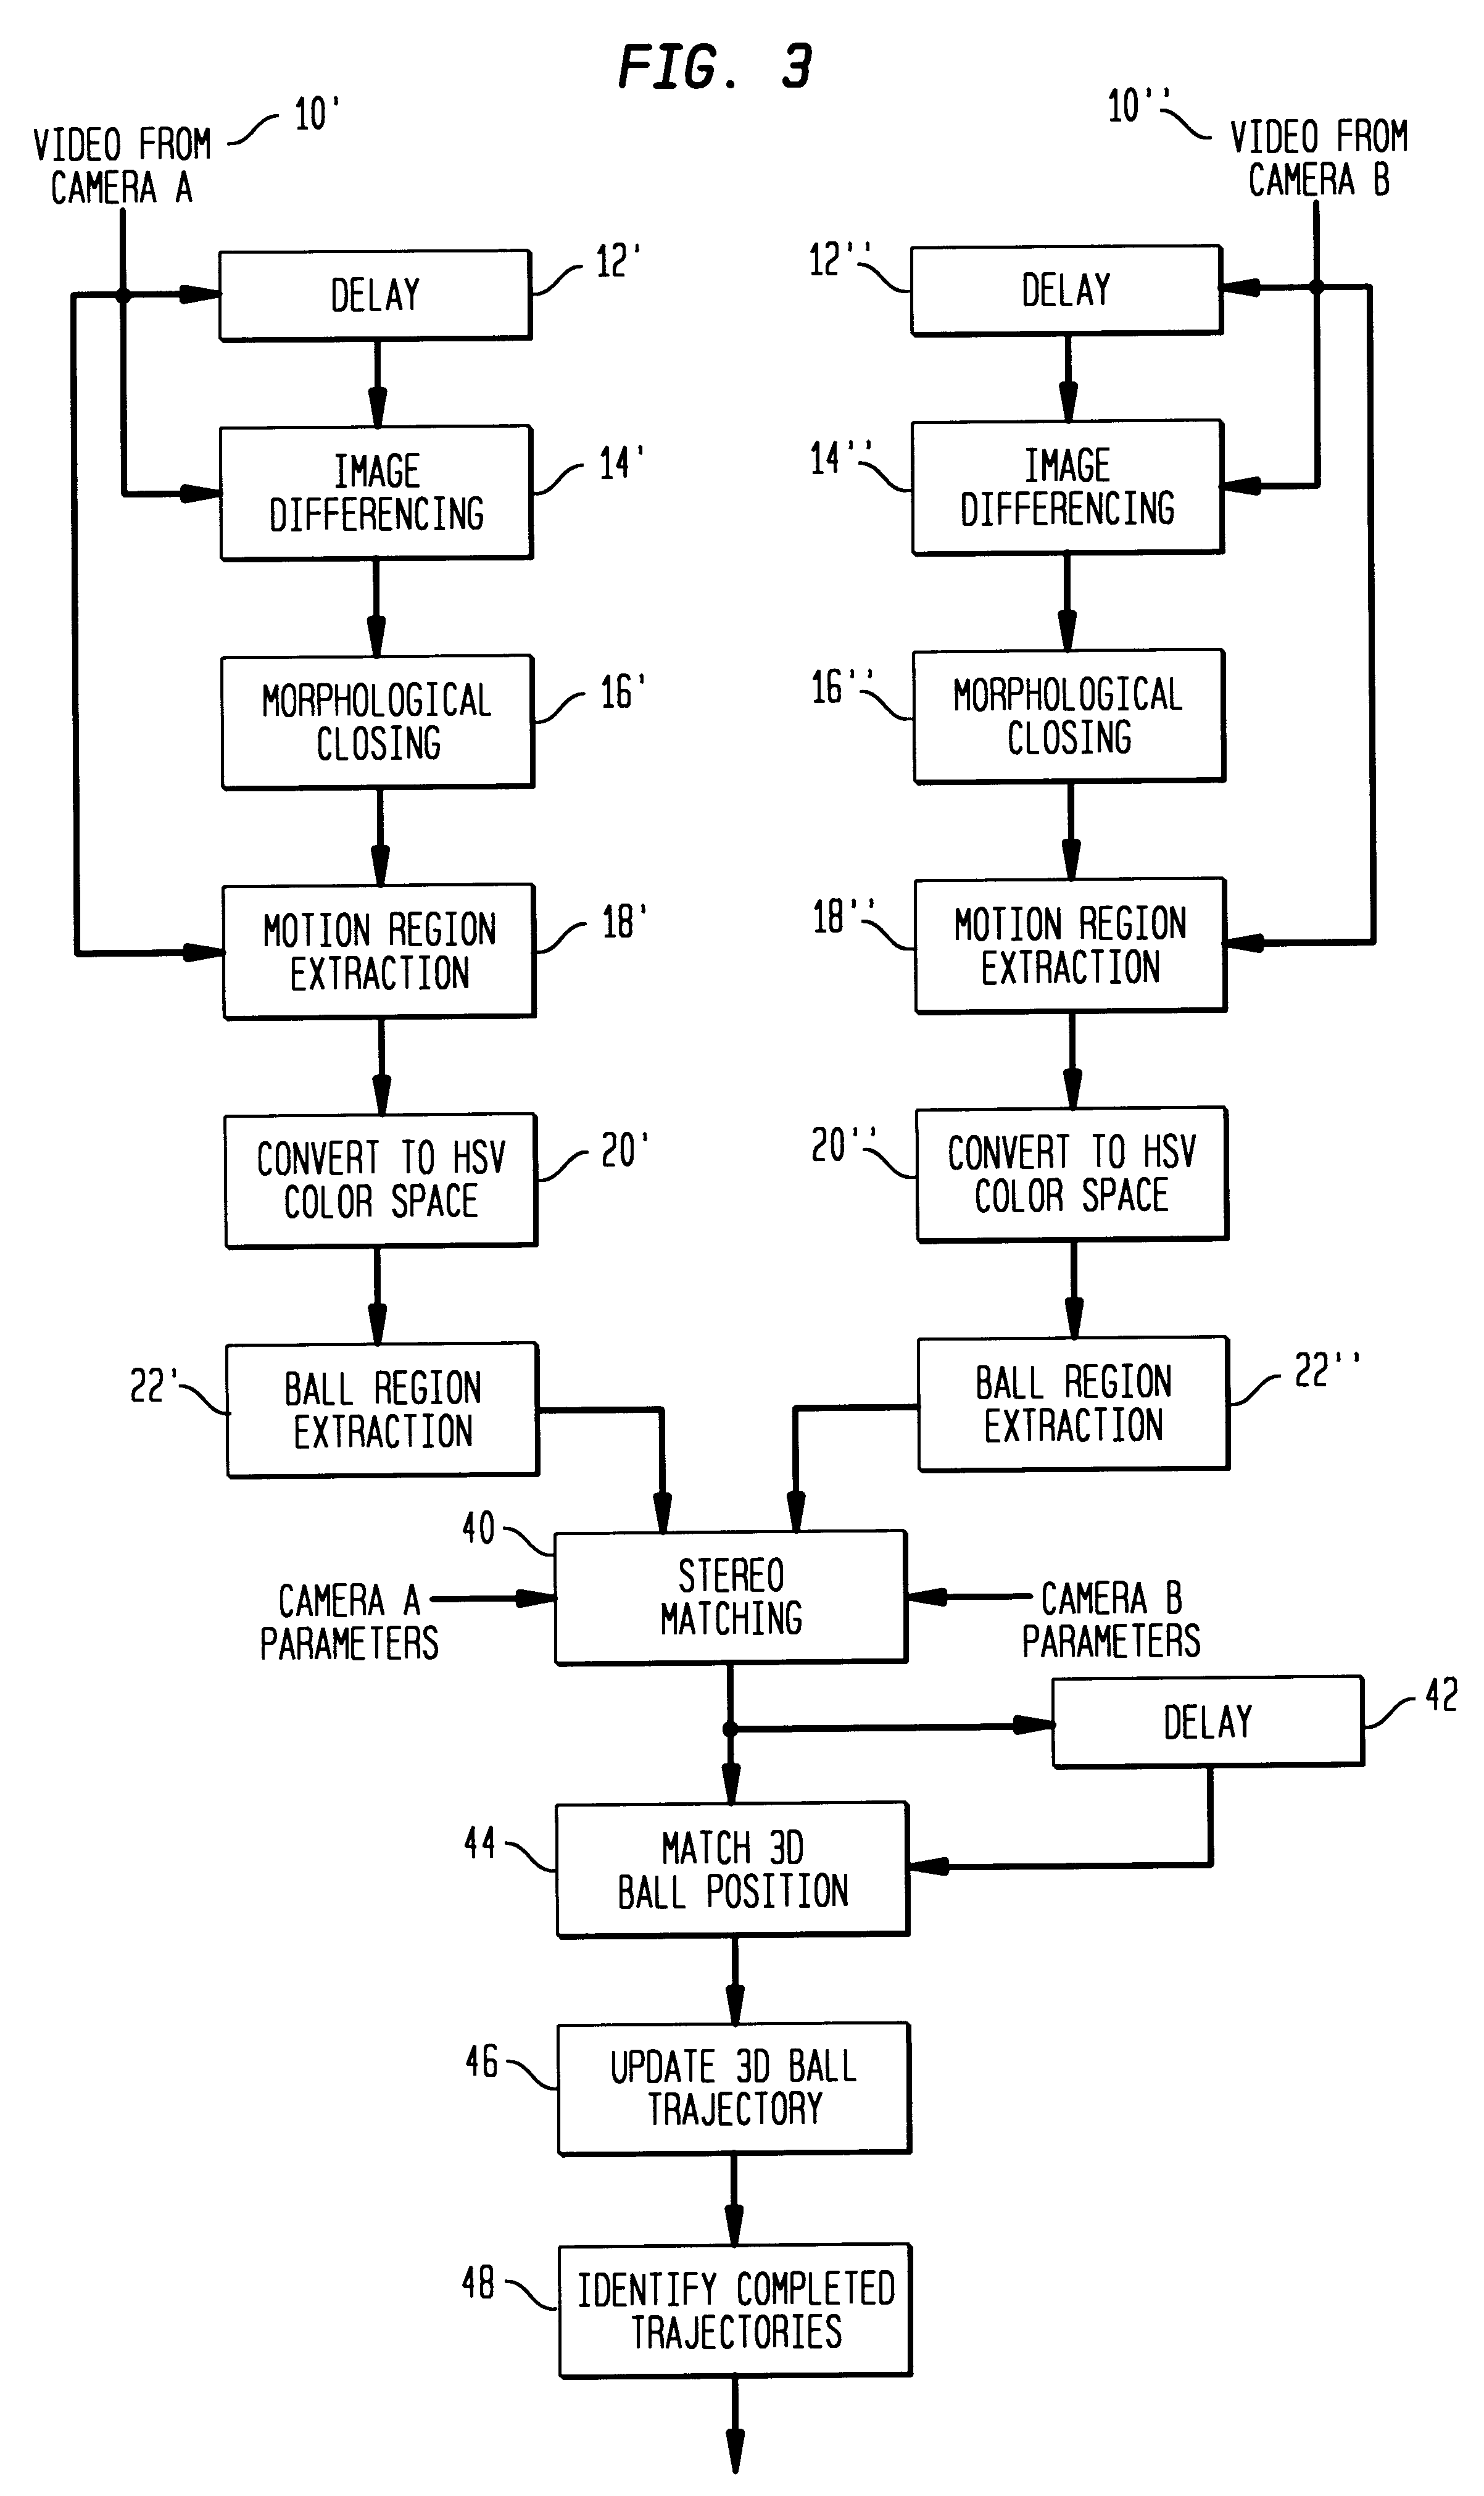 Method and apparatus for tracking position of a ball in real time